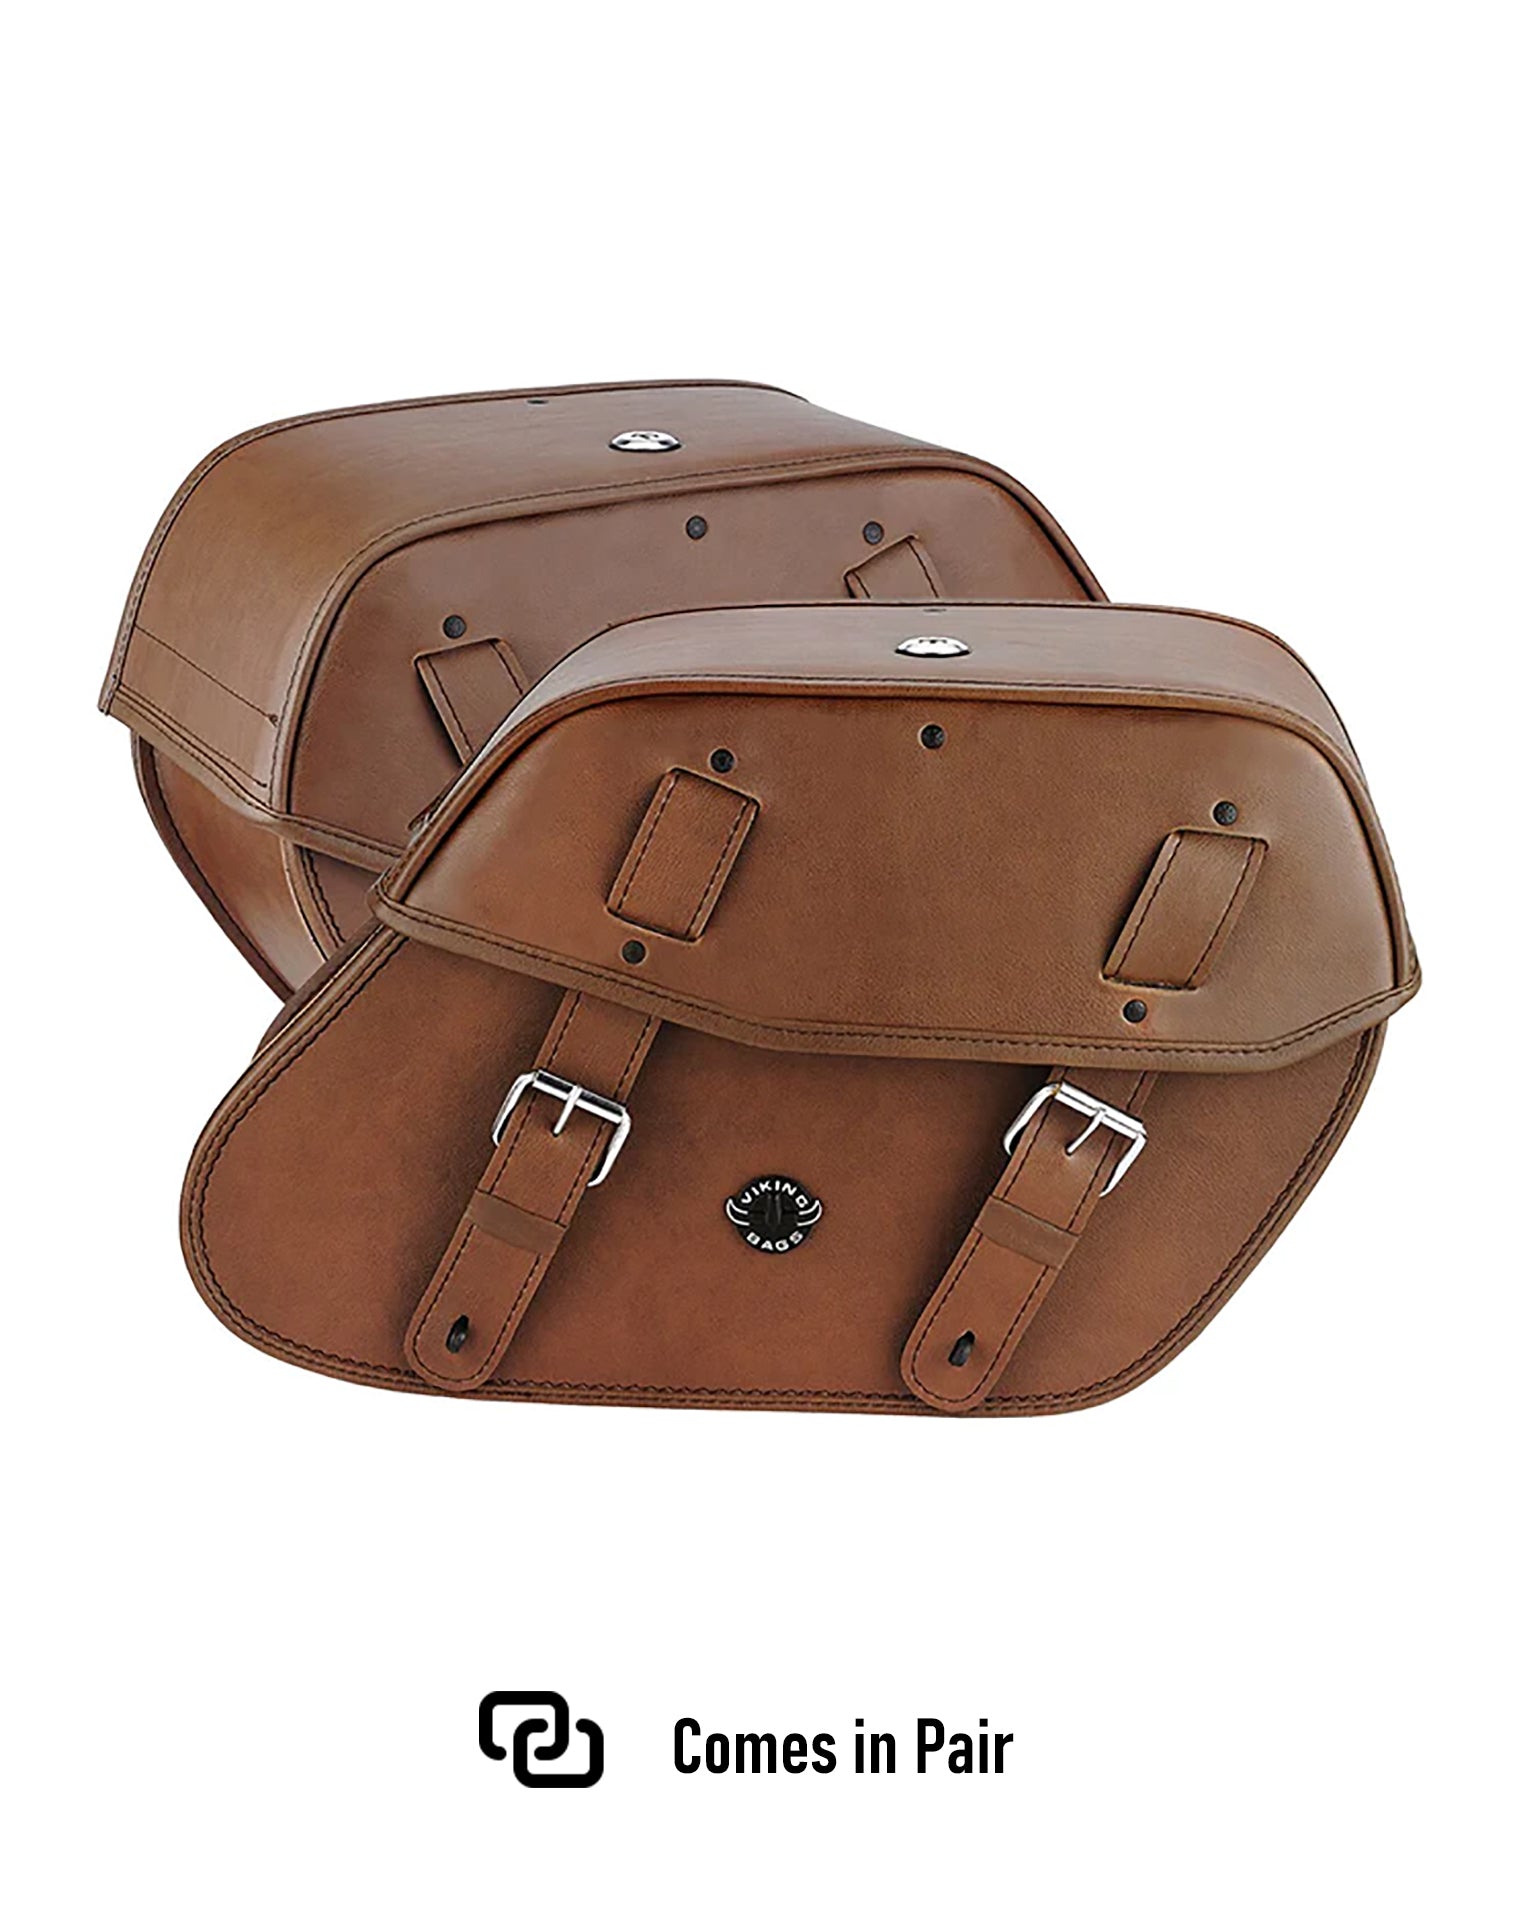 Viking Odin Brown Large Suzuki Boulevard S40 Savage Ls650 Leather Motorcycle Saddlebags Weather Resistant Bags Comes in Pair